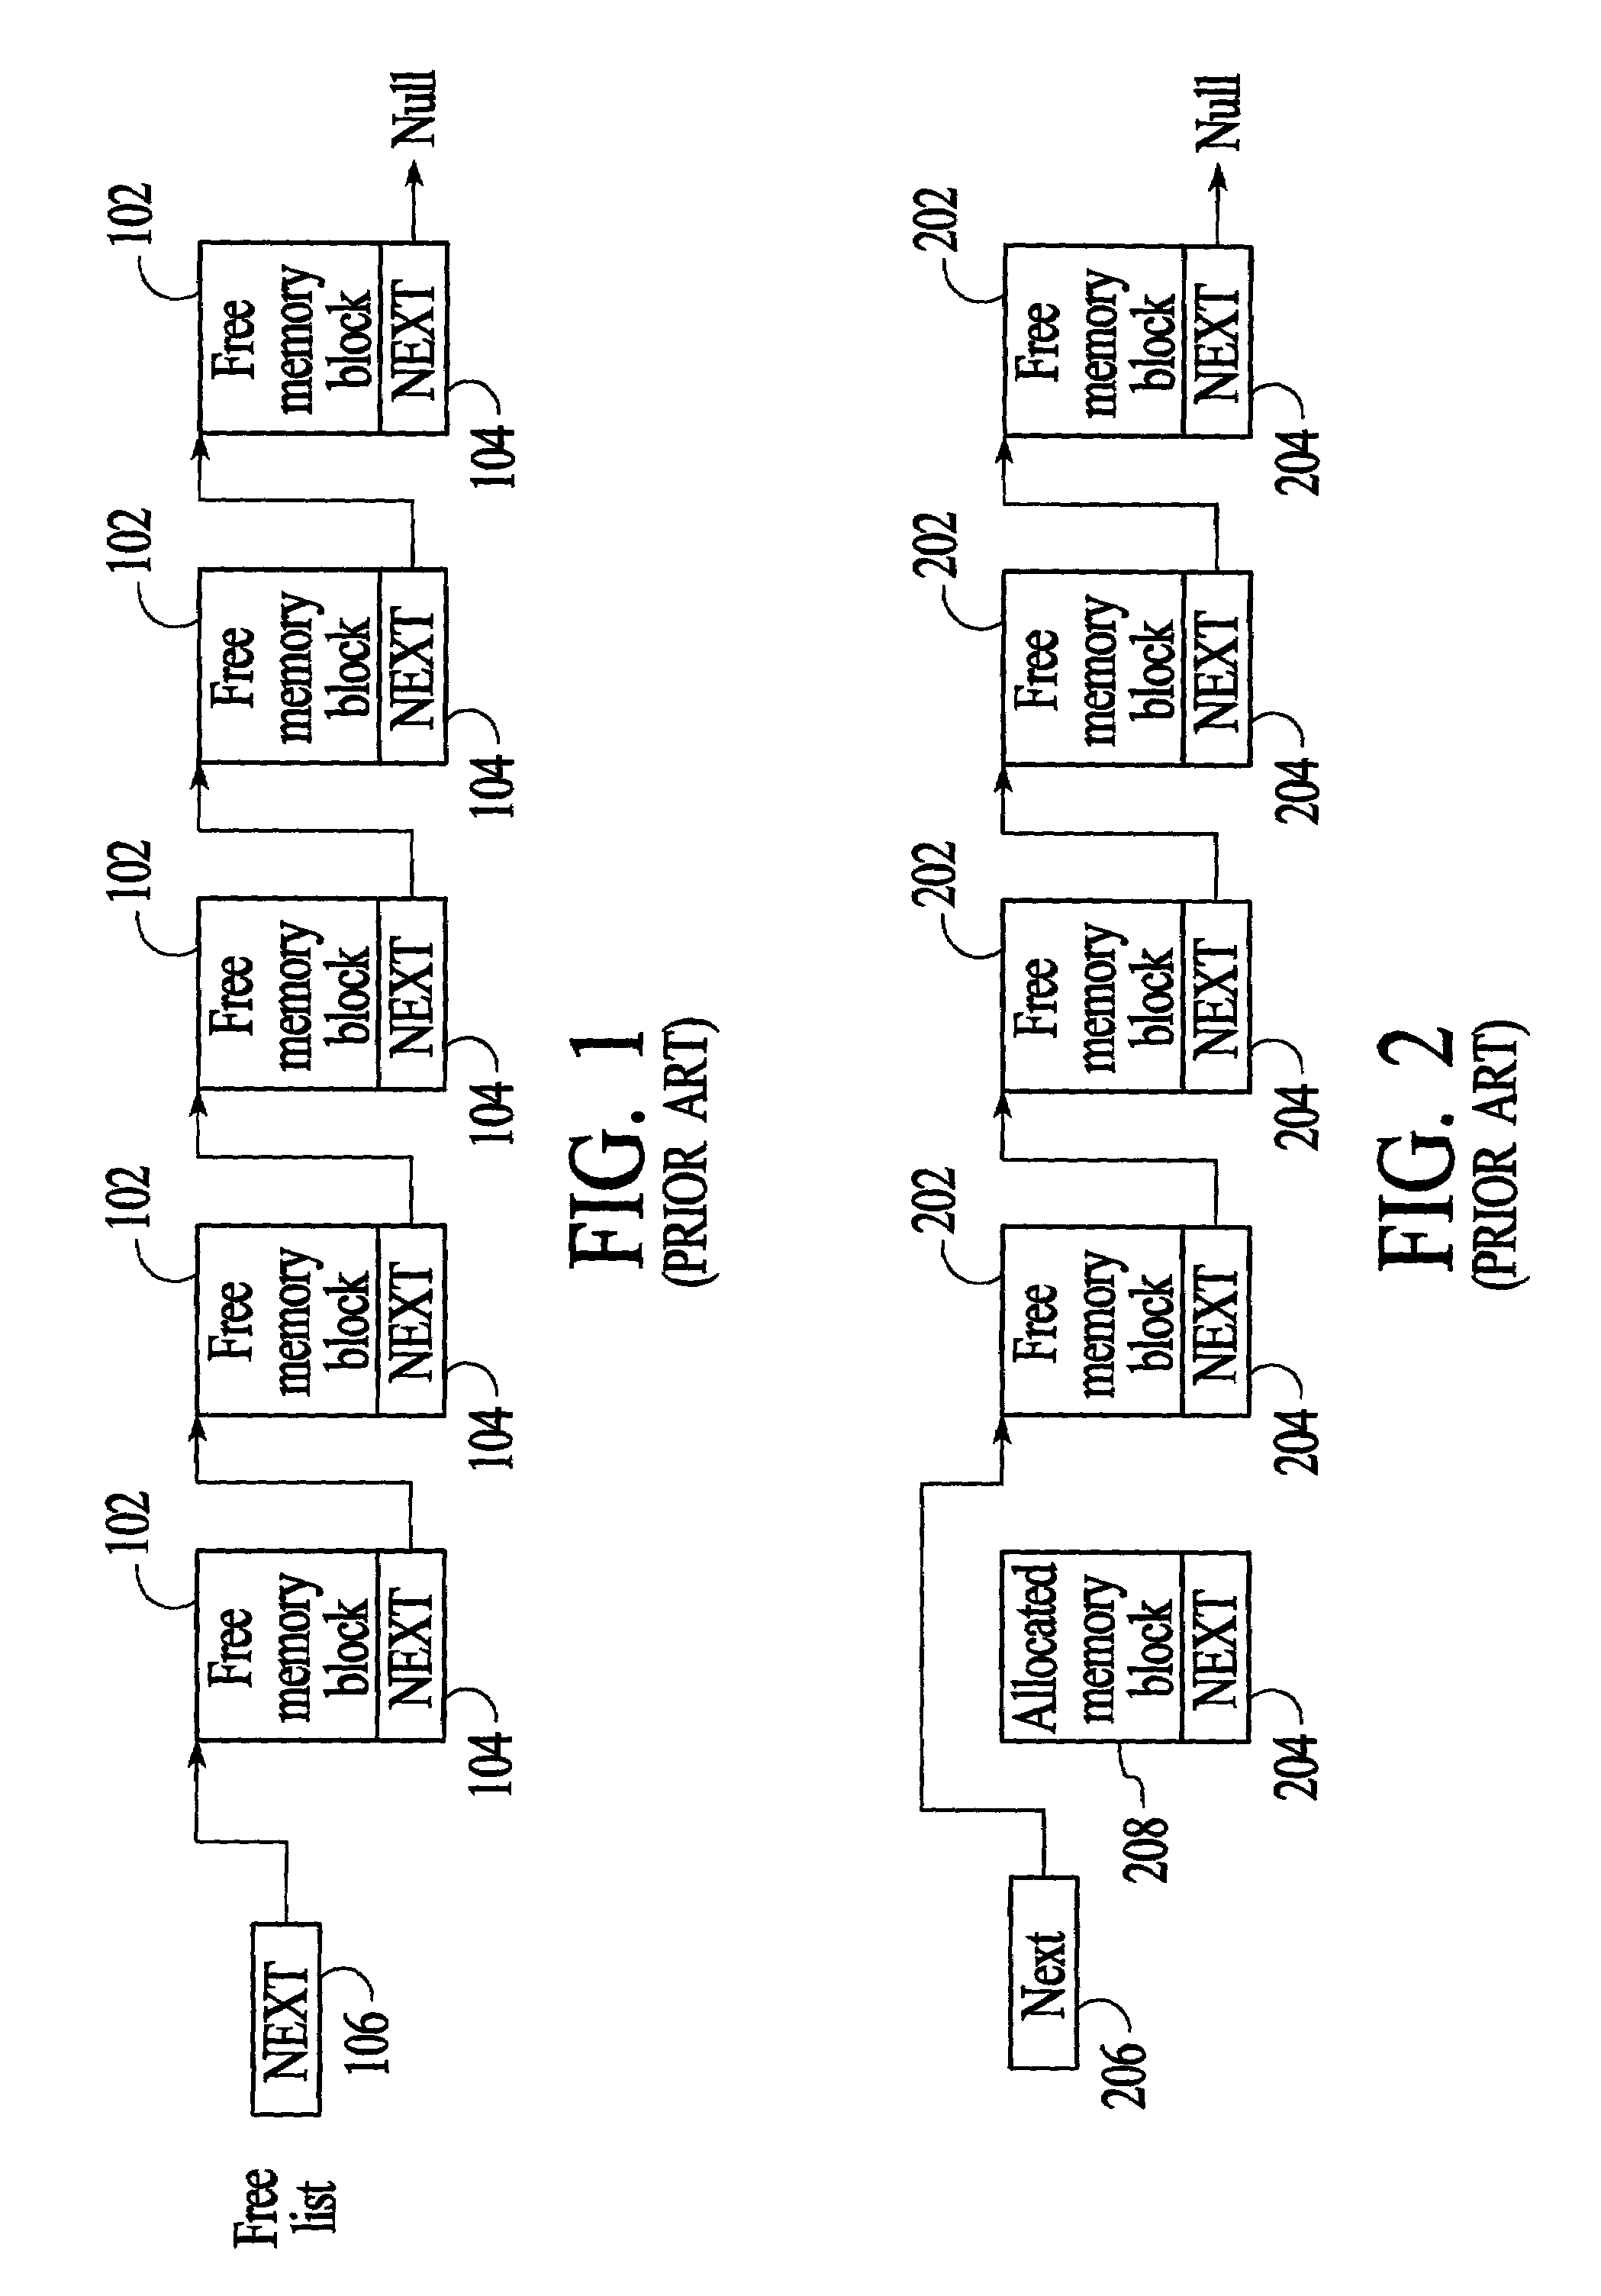 Method, system, and computer program product for managing a re-usable resource with linked list groups